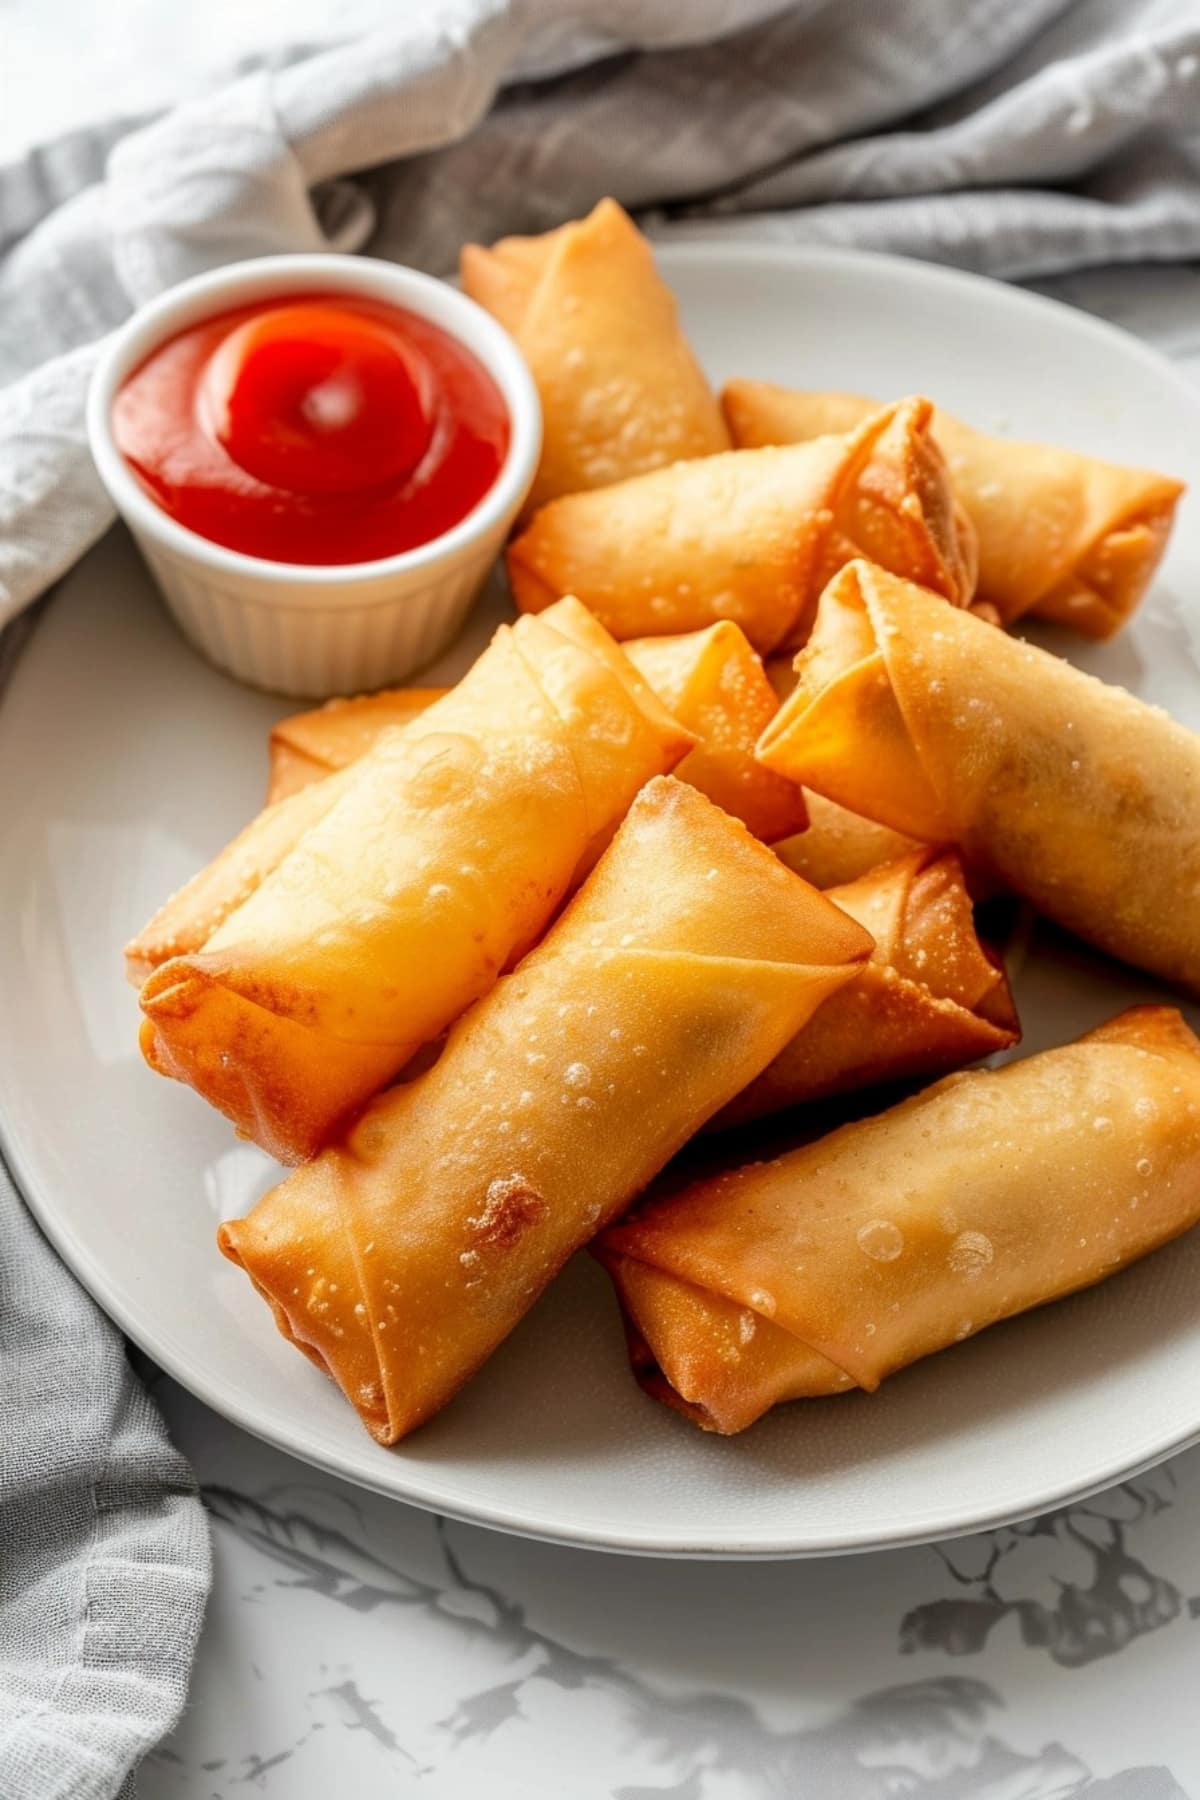 Egg rolls with ketchup dip in a ramekin bowl served on a white plate.